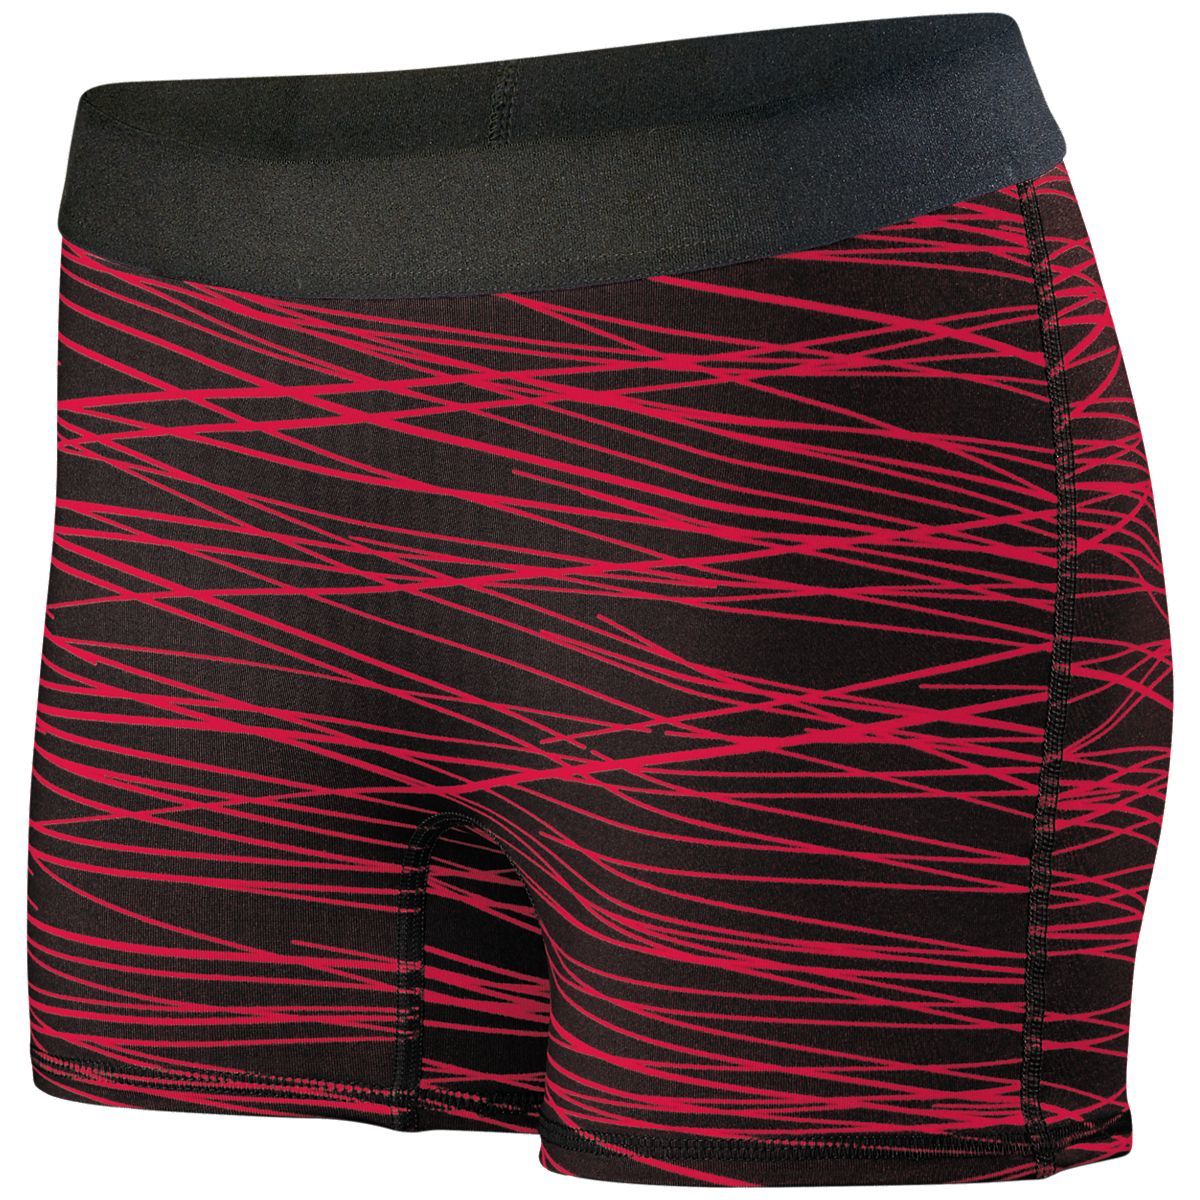 Augusta Sportswear Ladies Hyperform Fitted Shorts in Black/Red Print  -Part of the Ladies, Ladies-Shorts, Augusta-Products product lines at KanaleyCreations.com